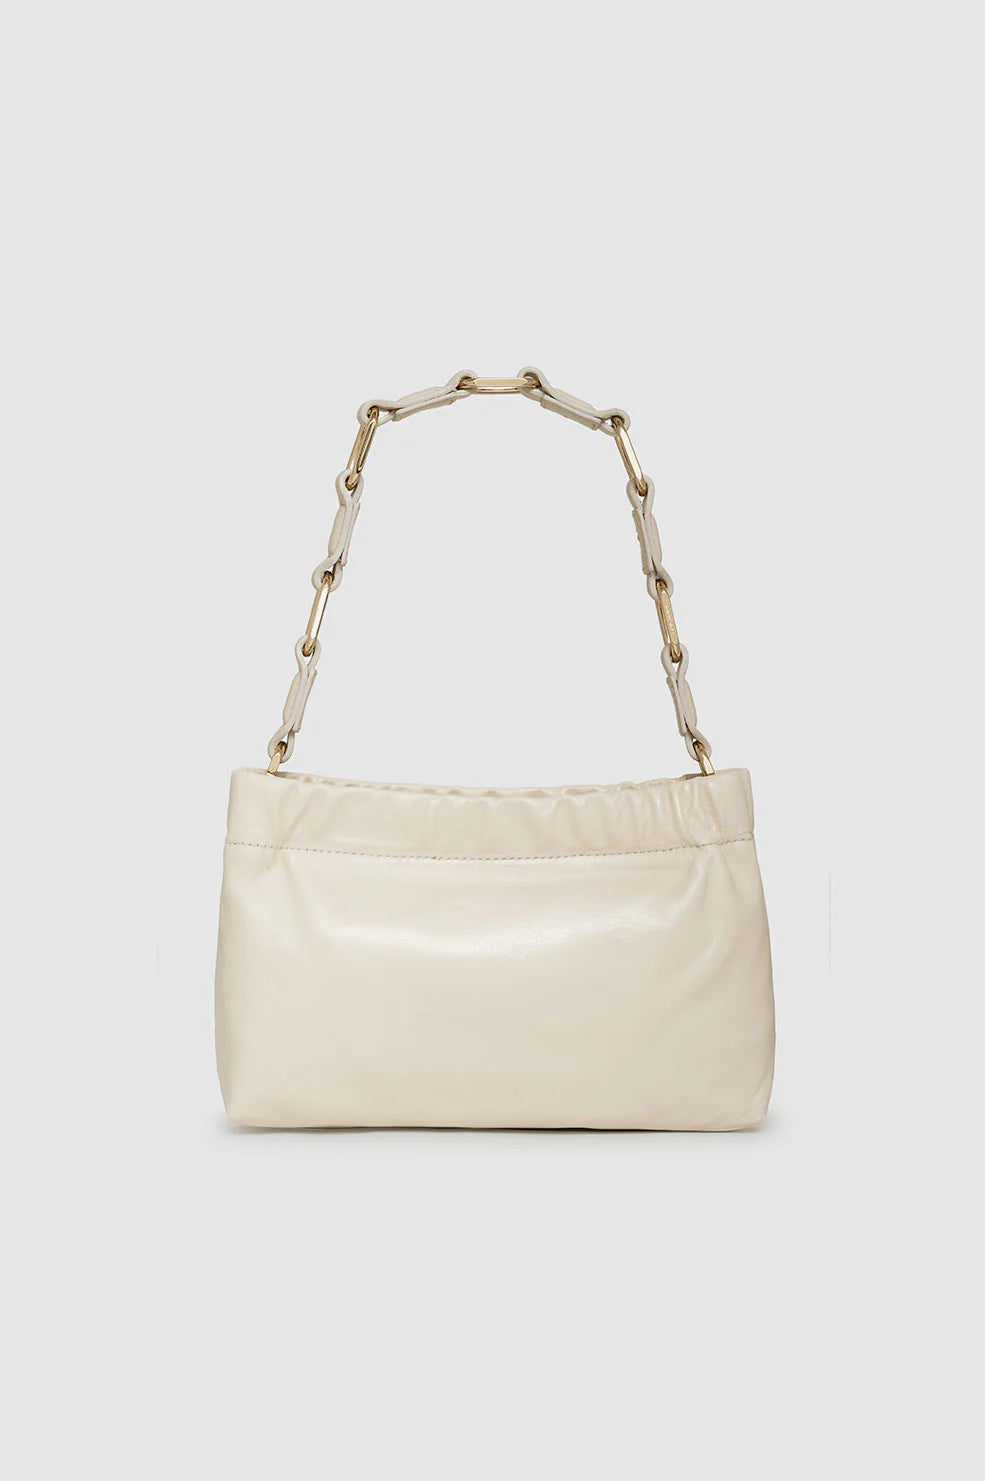 Anine Bing - Small Kate Shoulder Bag in Ivory